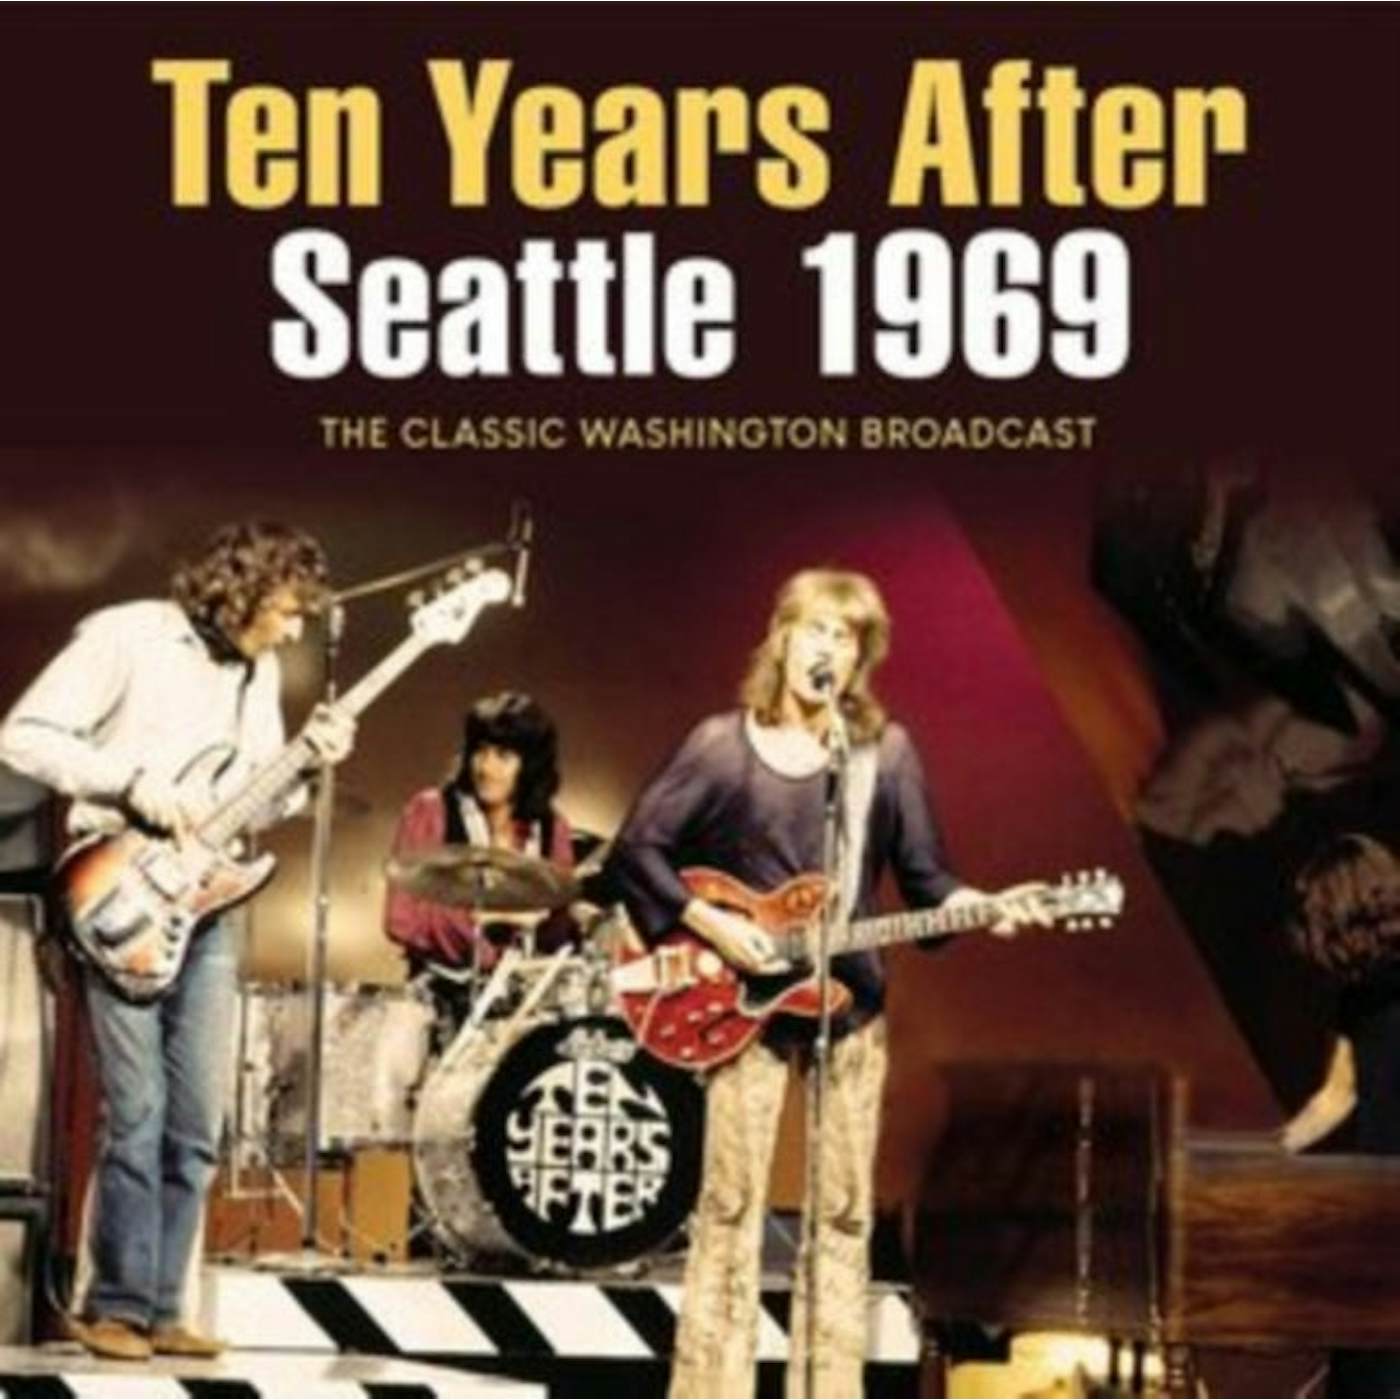 Ten Years After CD - Seattle 1969